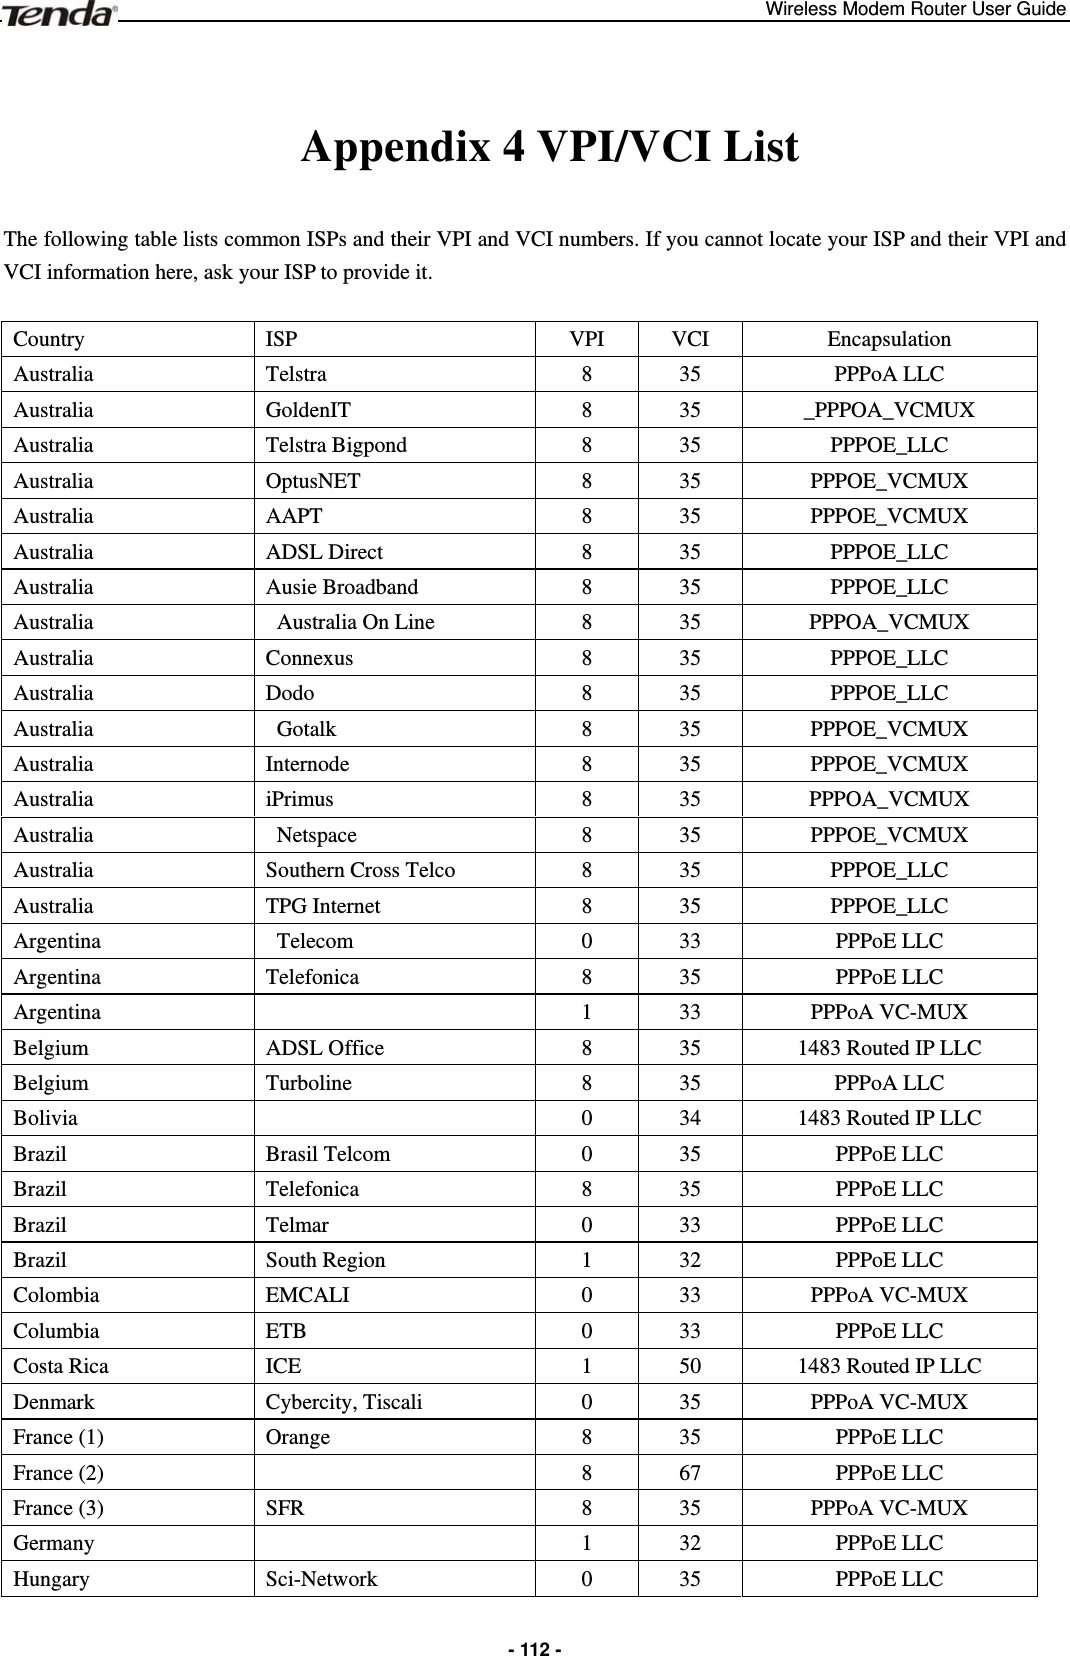 Wireless Modem Router User Guide  - 112 -Appendix 4 VPI/VCI List The following table lists common ISPs and their VPI and VCI numbers. If you cannot locate your ISP and their VPI and VCI information here, ask your ISP to provide it.  Country  ISP   VPI  VCI  Encapsulation Australia  Telstra  8  35  PPPoA LLC Australia   GoldenIT  8  35  _PPPOA_VCMUX Australia   Telstra Bigpond  8  35  PPPOE_LLC Australia  OptusNET  8  35  PPPOE_VCMUX Australia   AAPT  8  35  PPPOE_VCMUX Australia   ADSL Direct  8  35  PPPOE_LLC Australia   Ausie Broadband  8  35  PPPOE_LLC Australia     Australia On Line  8  35  PPPOA_VCMUX Australia   Connexus  8  35  PPPOE_LLC Australia   Dodo  8  35  PPPOE_LLC Australia   Gotalk  8  35  PPPOE_VCMUX Australia   Internode  8  35  PPPOE_VCMUX Australia   iPrimus  8  35  PPPOA_VCMUX Australia    Netspace  8  35  PPPOE_VCMUX Australia   Southern Cross Telco  8  35  PPPOE_LLC Australia   TPG Internet  8  35  PPPOE_LLC Argentina   Telecom  0  33  PPPoE LLC Argentina   Telefonica  8  35  PPPoE LLC Argentina    1  33  PPPoA VC-MUX Belgium  ADSL Office  8  35  1483 Routed IP LLC Belgium  Turboline  8  35  PPPoA LLC Bolivia    0  34  1483 Routed IP LLC Brazil   Brasil Telcom  0  35  PPPoE LLC Brazil   Telefonica  8  35  PPPoE LLC Brazil  Telmar  0  33  PPPoE LLC Brazil   South Region  1  32  PPPoE LLC Colombia   EMCALI  0  33  PPPoA VC-MUX Columbia   ETB  0  33  PPPoE LLC Costa Rica  ICE  1  50  1483 Routed IP LLC Denmark  Cybercity, Tiscali  0  35  PPPoA VC-MUX France (1)  Orange  8  35  PPPoE LLC France (2)    8  67  PPPoE LLC France (3)  SFR  8  35  PPPoA VC-MUX Germany    1  32  PPPoE LLC Hungary   Sci-Network  0  35  PPPoE LLC 